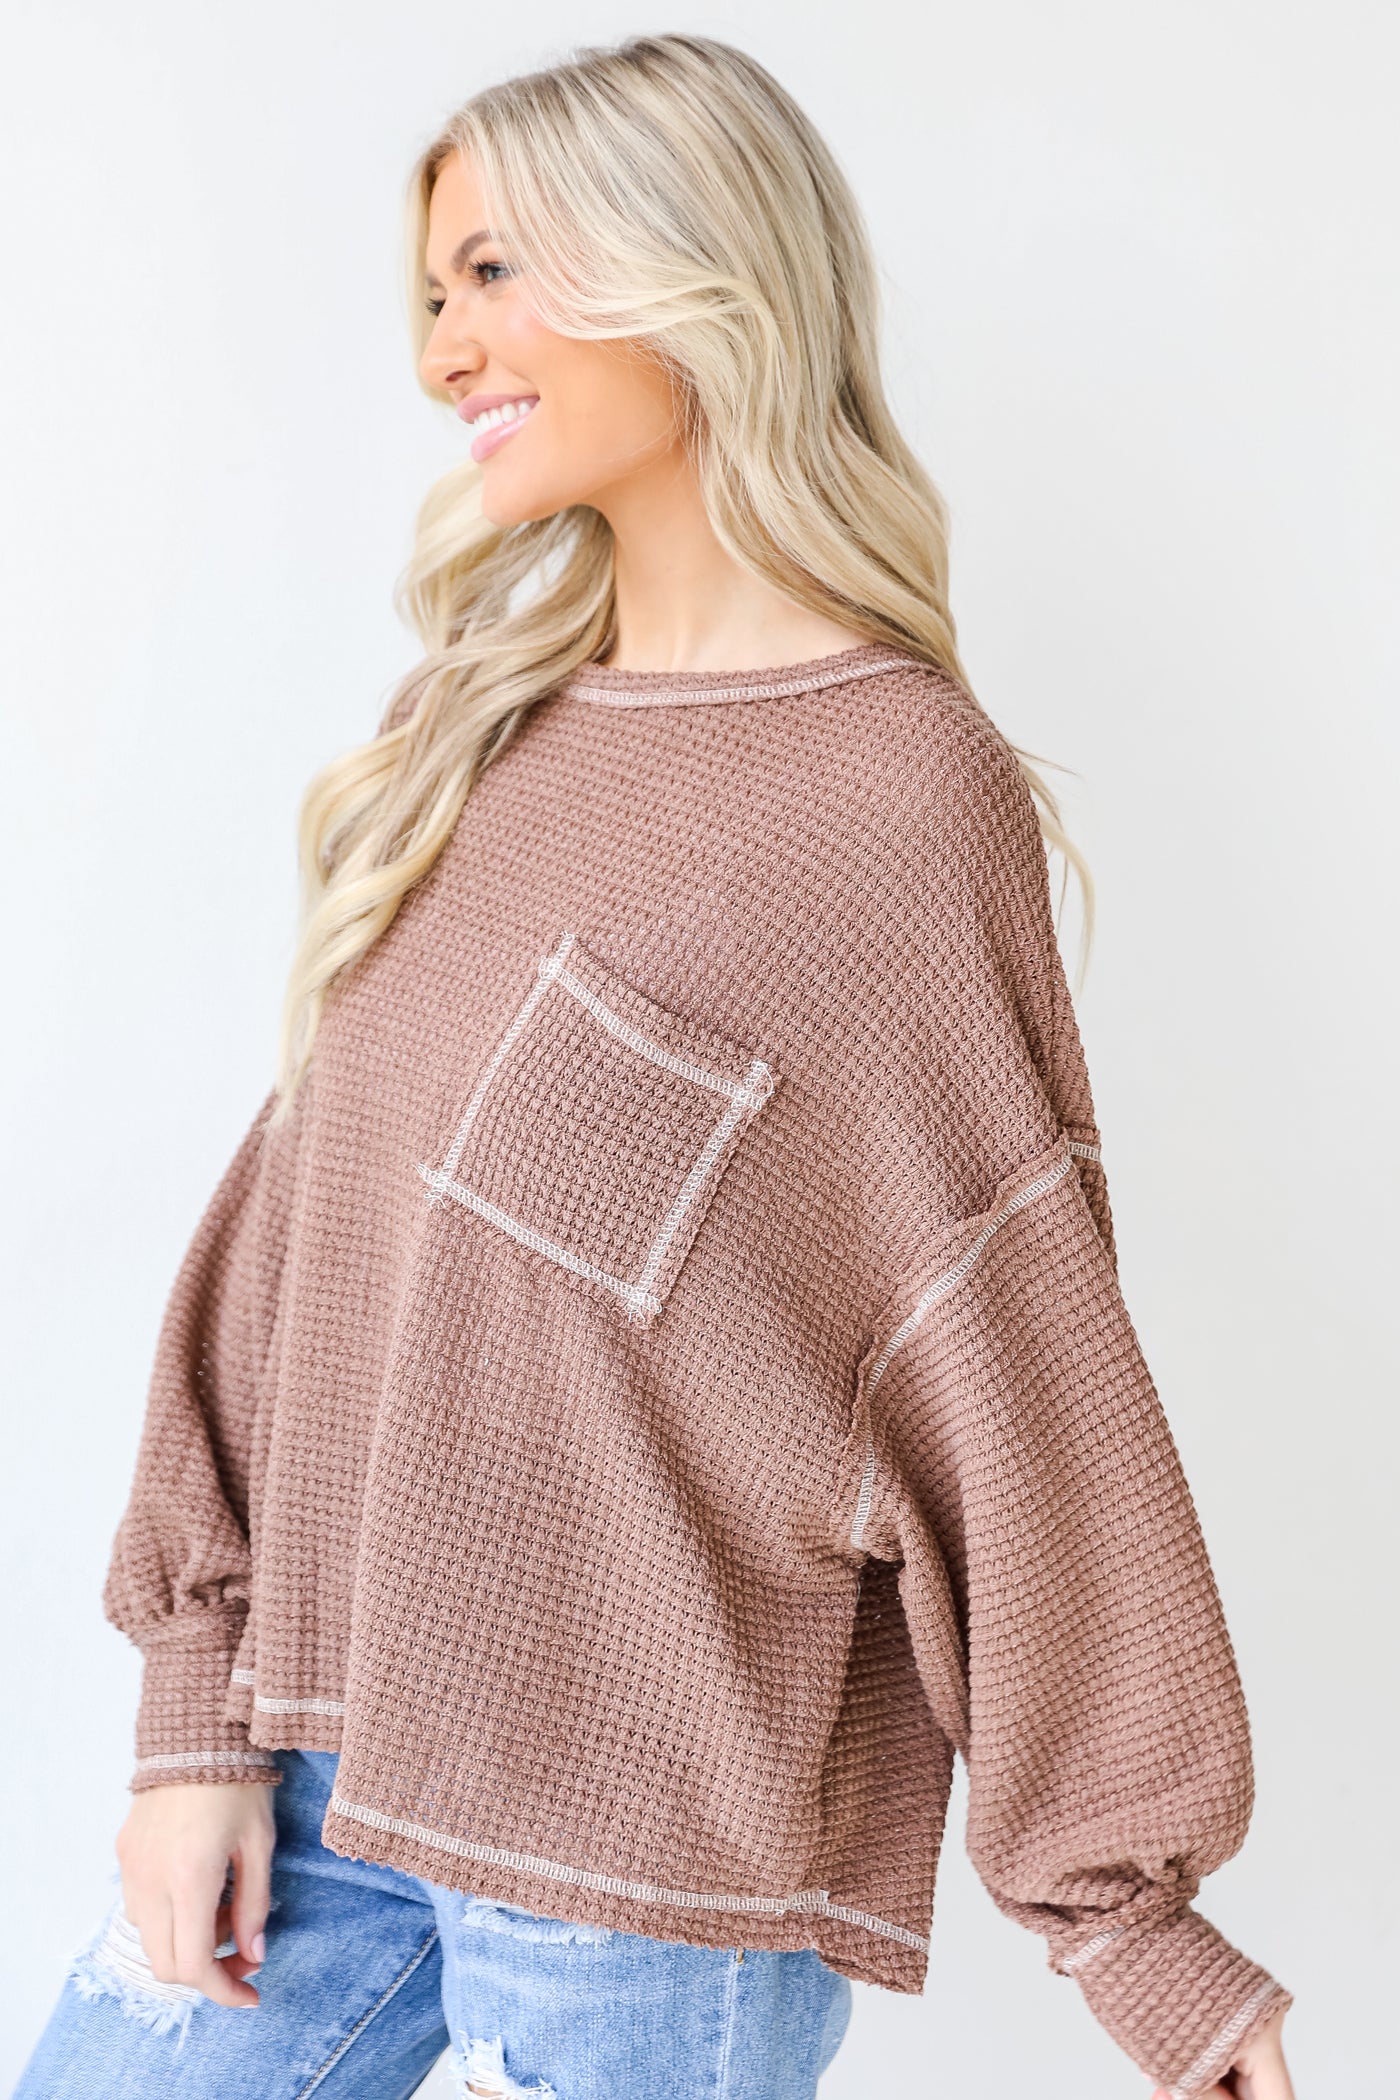 Waffle Knit Top side view